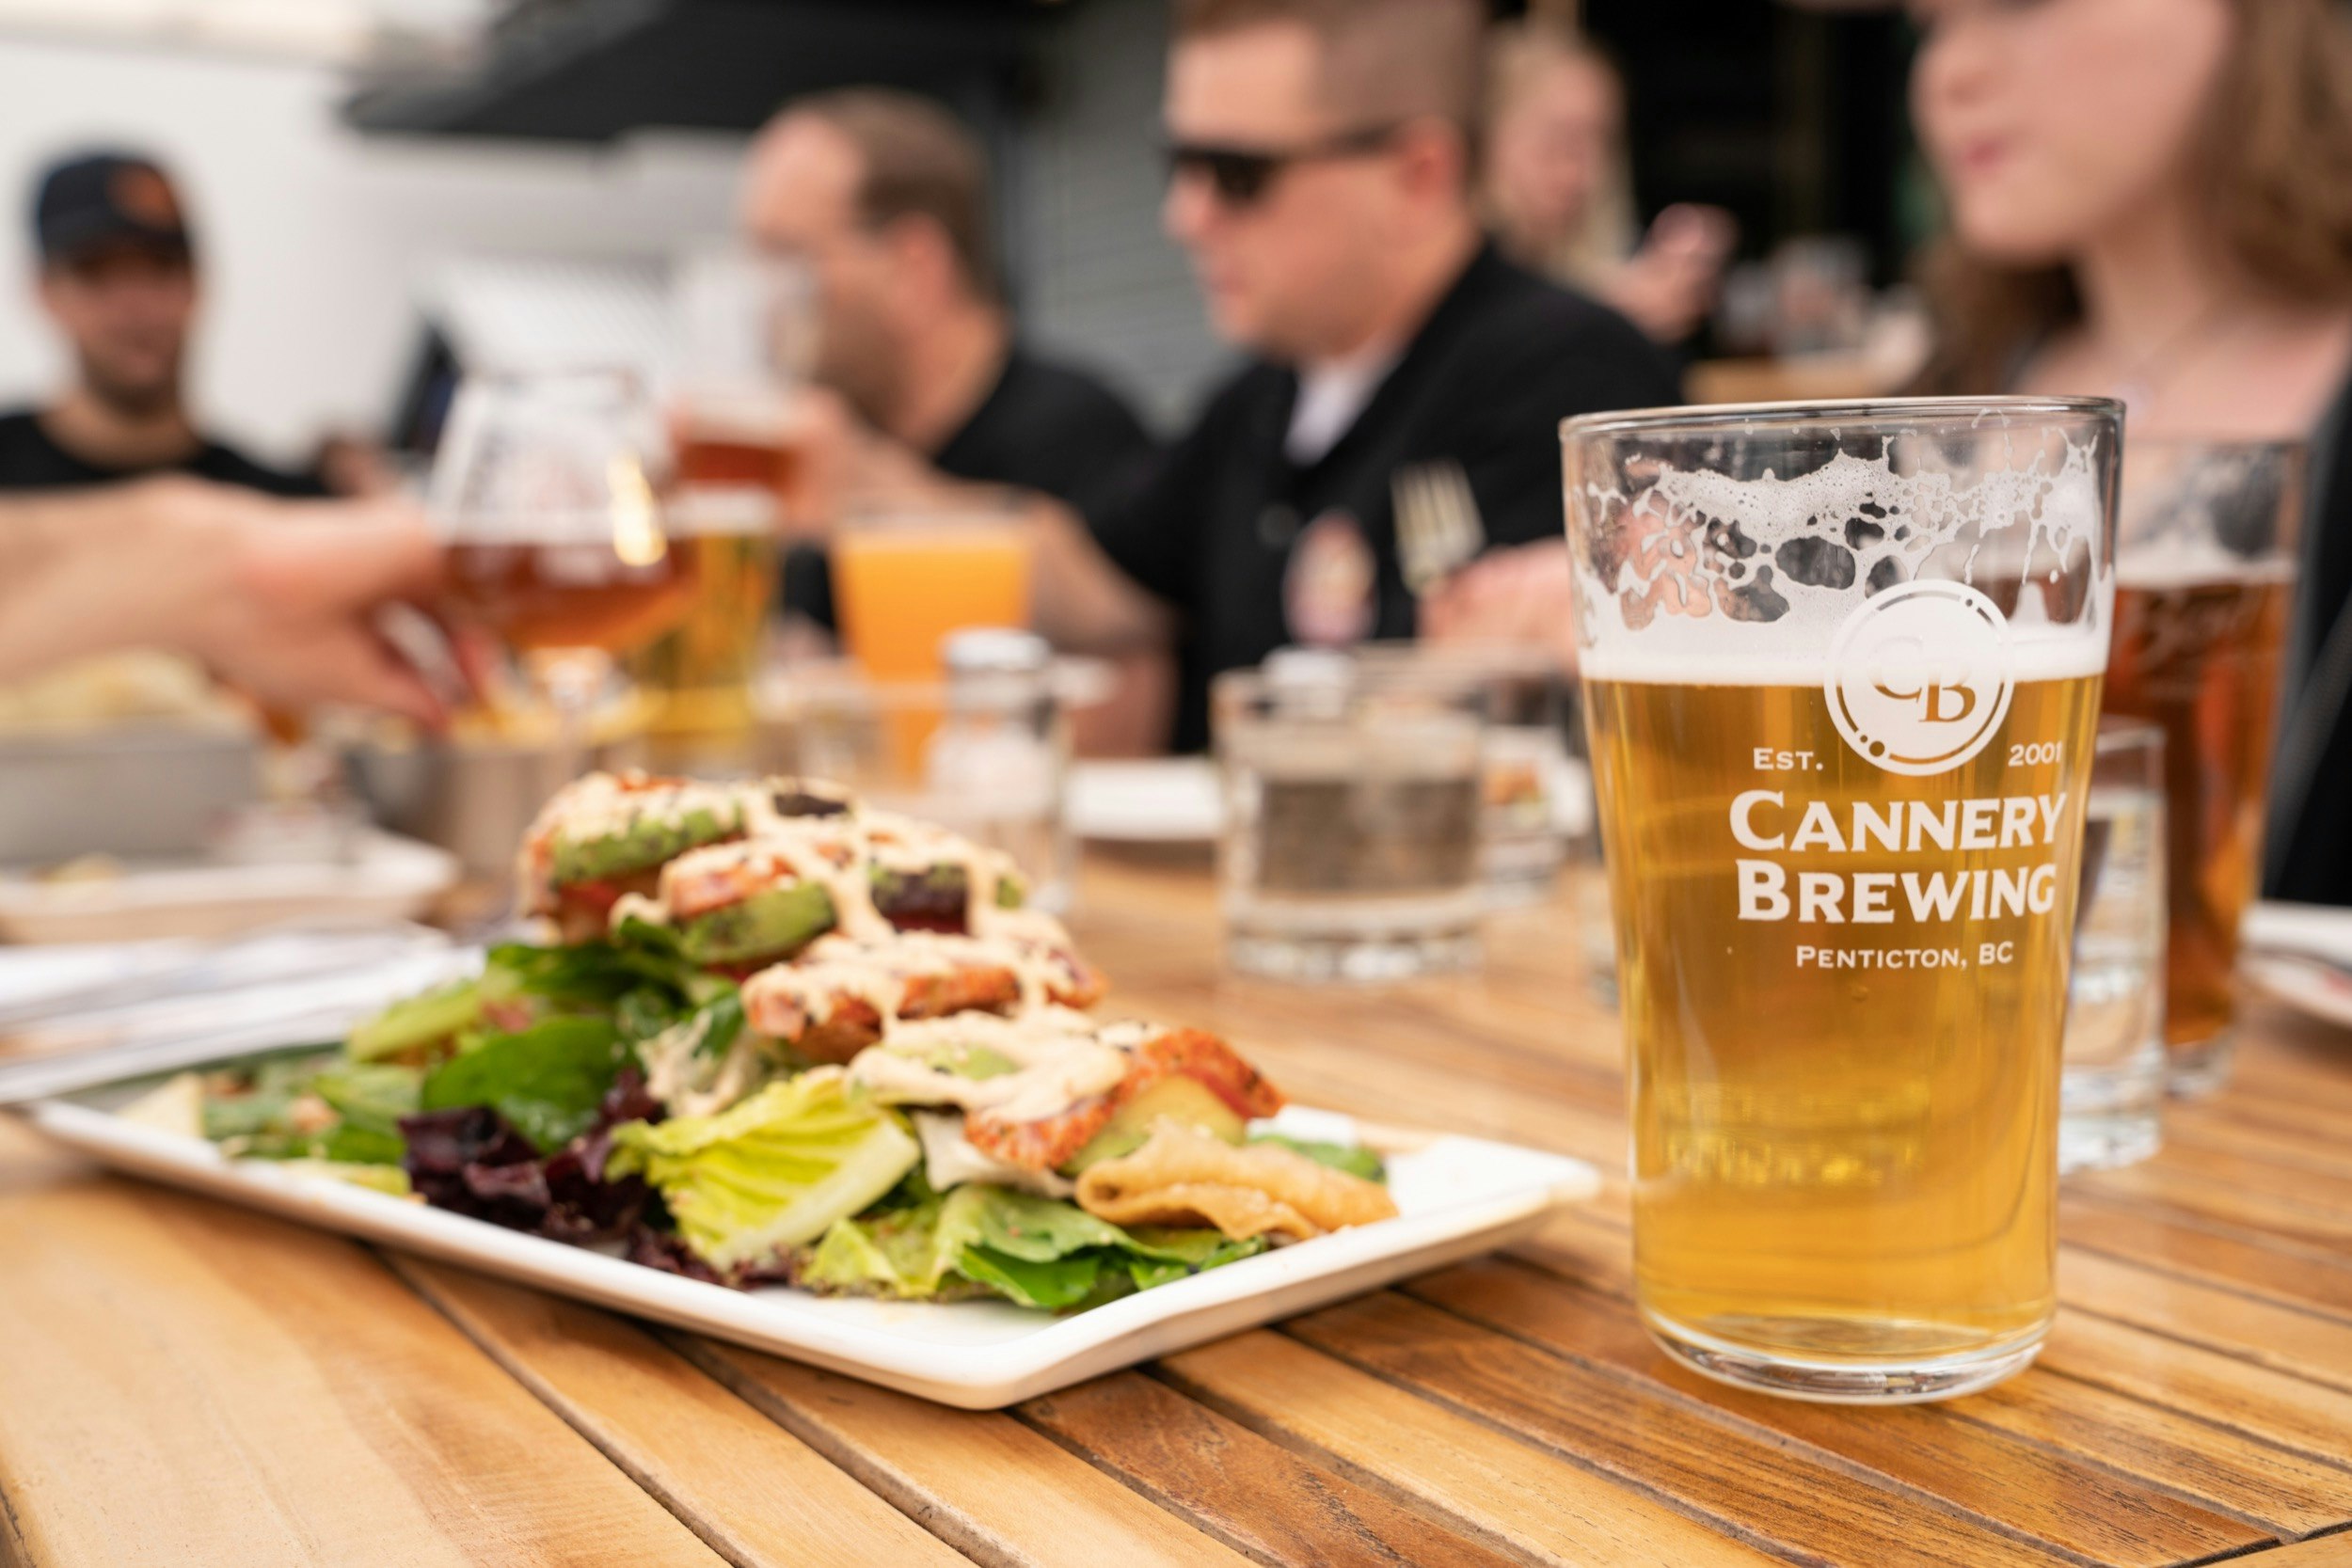 A glass of light amber beer is seen in a Cannery Brewing glass, with a fresh salad and socializing people in the background